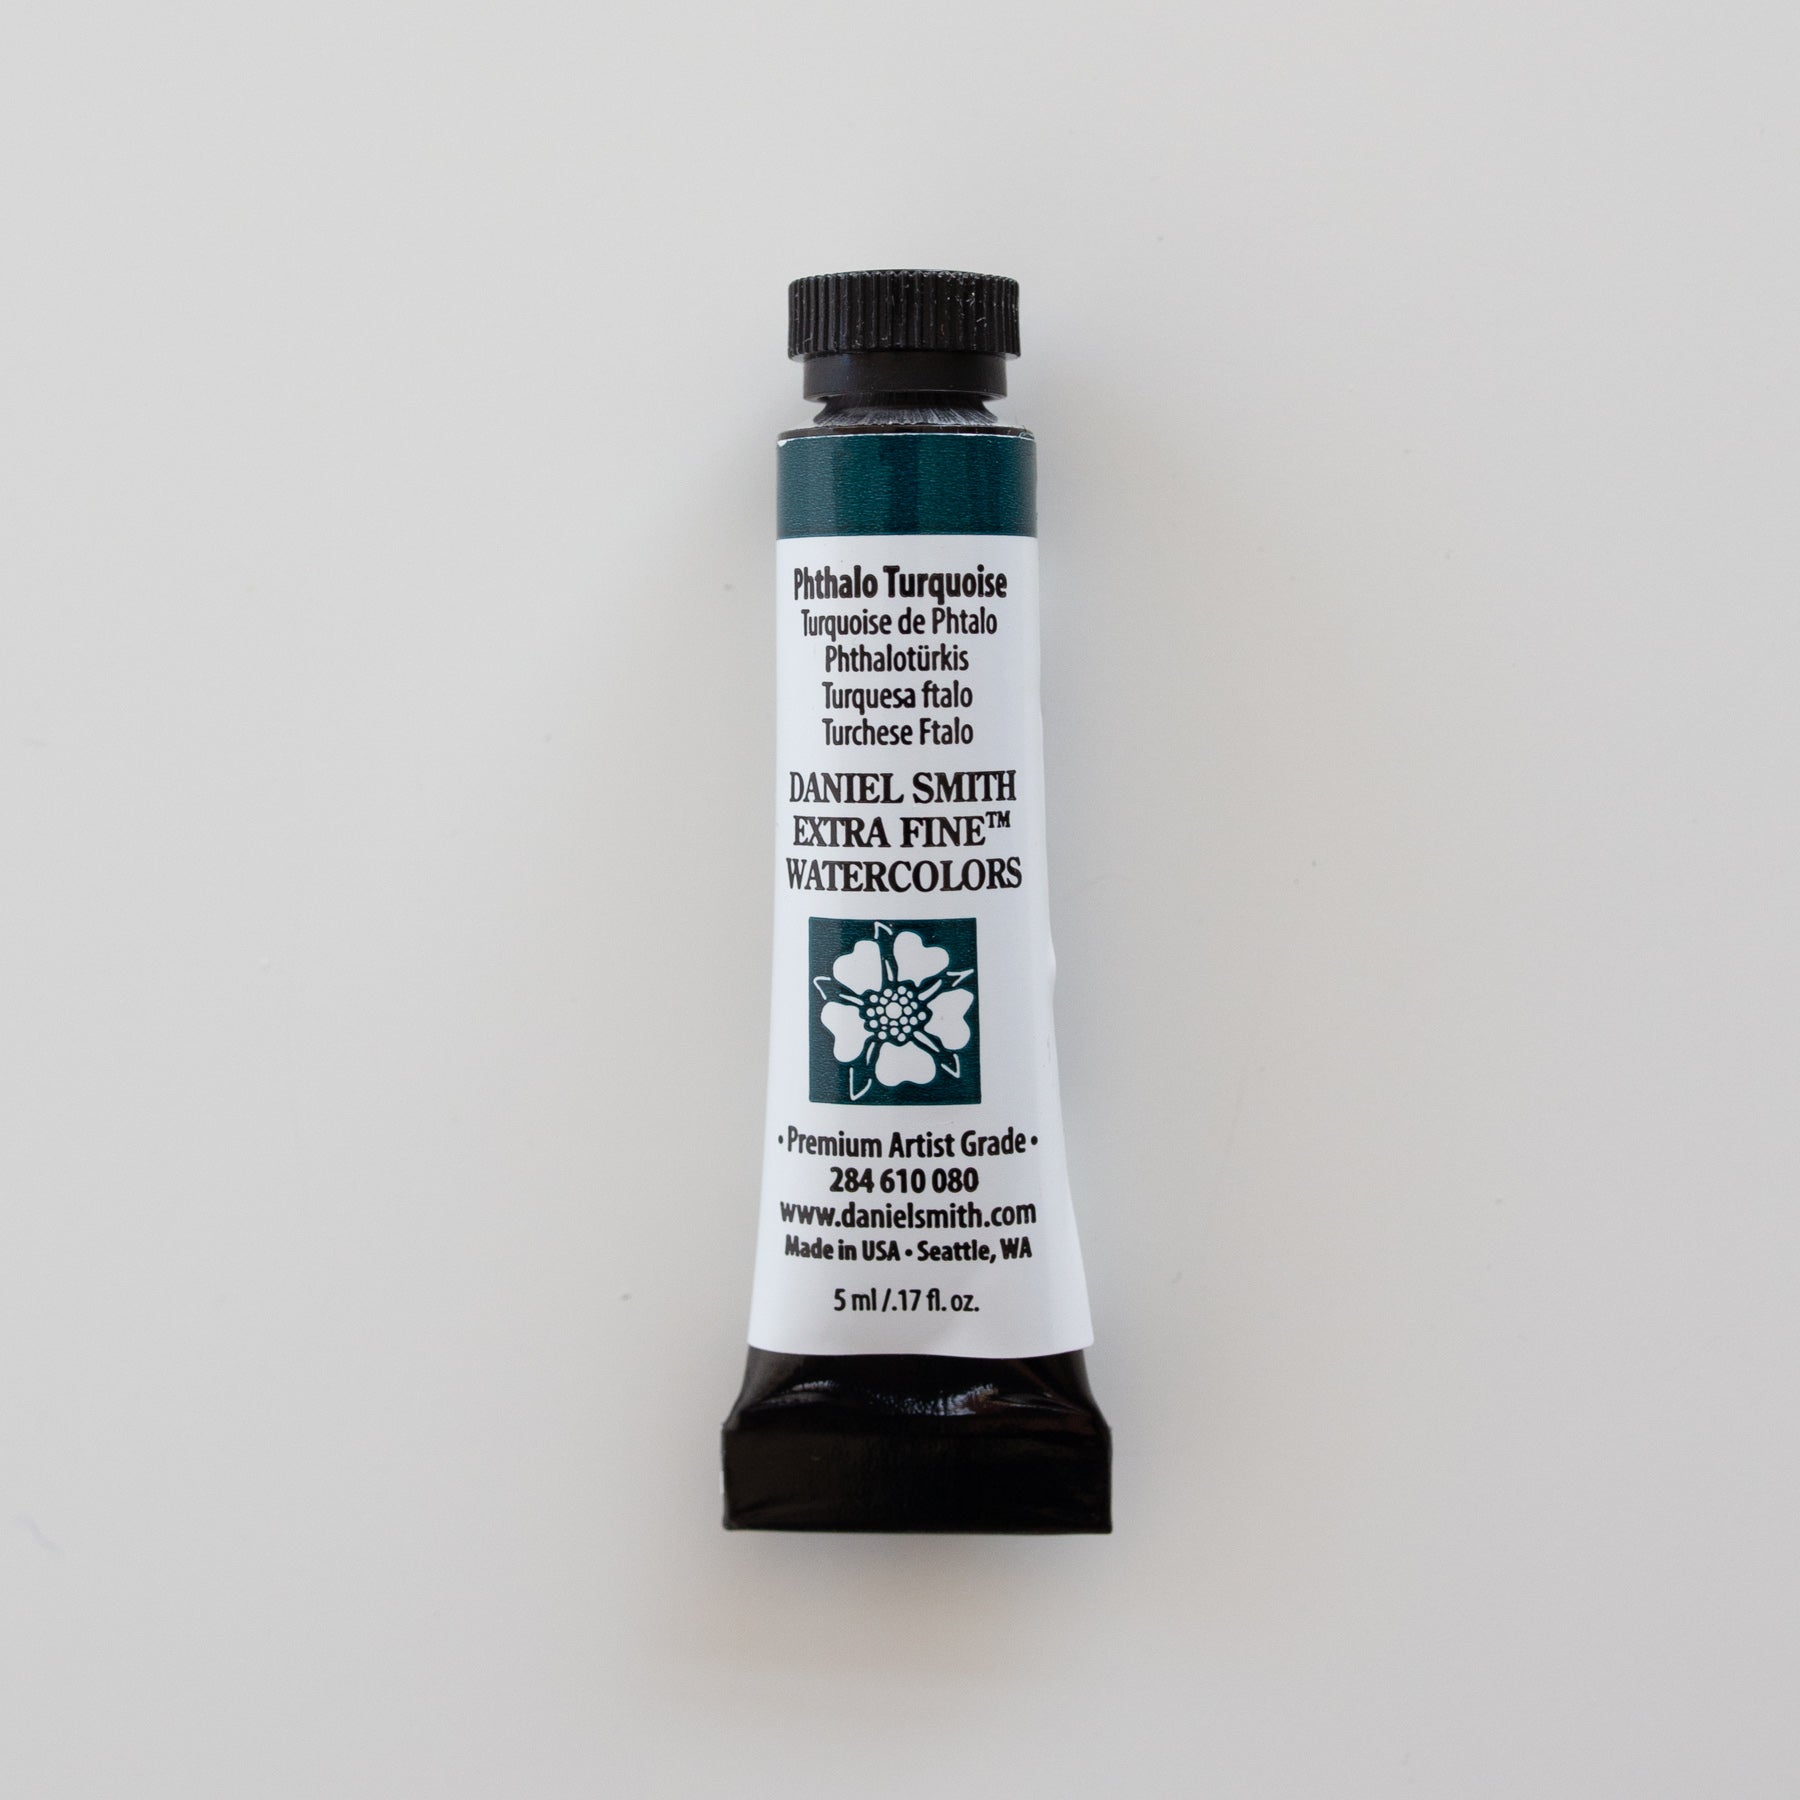 Daniel Smith Extra Fine Watercolors 5ml Phthalo Turquoise 1